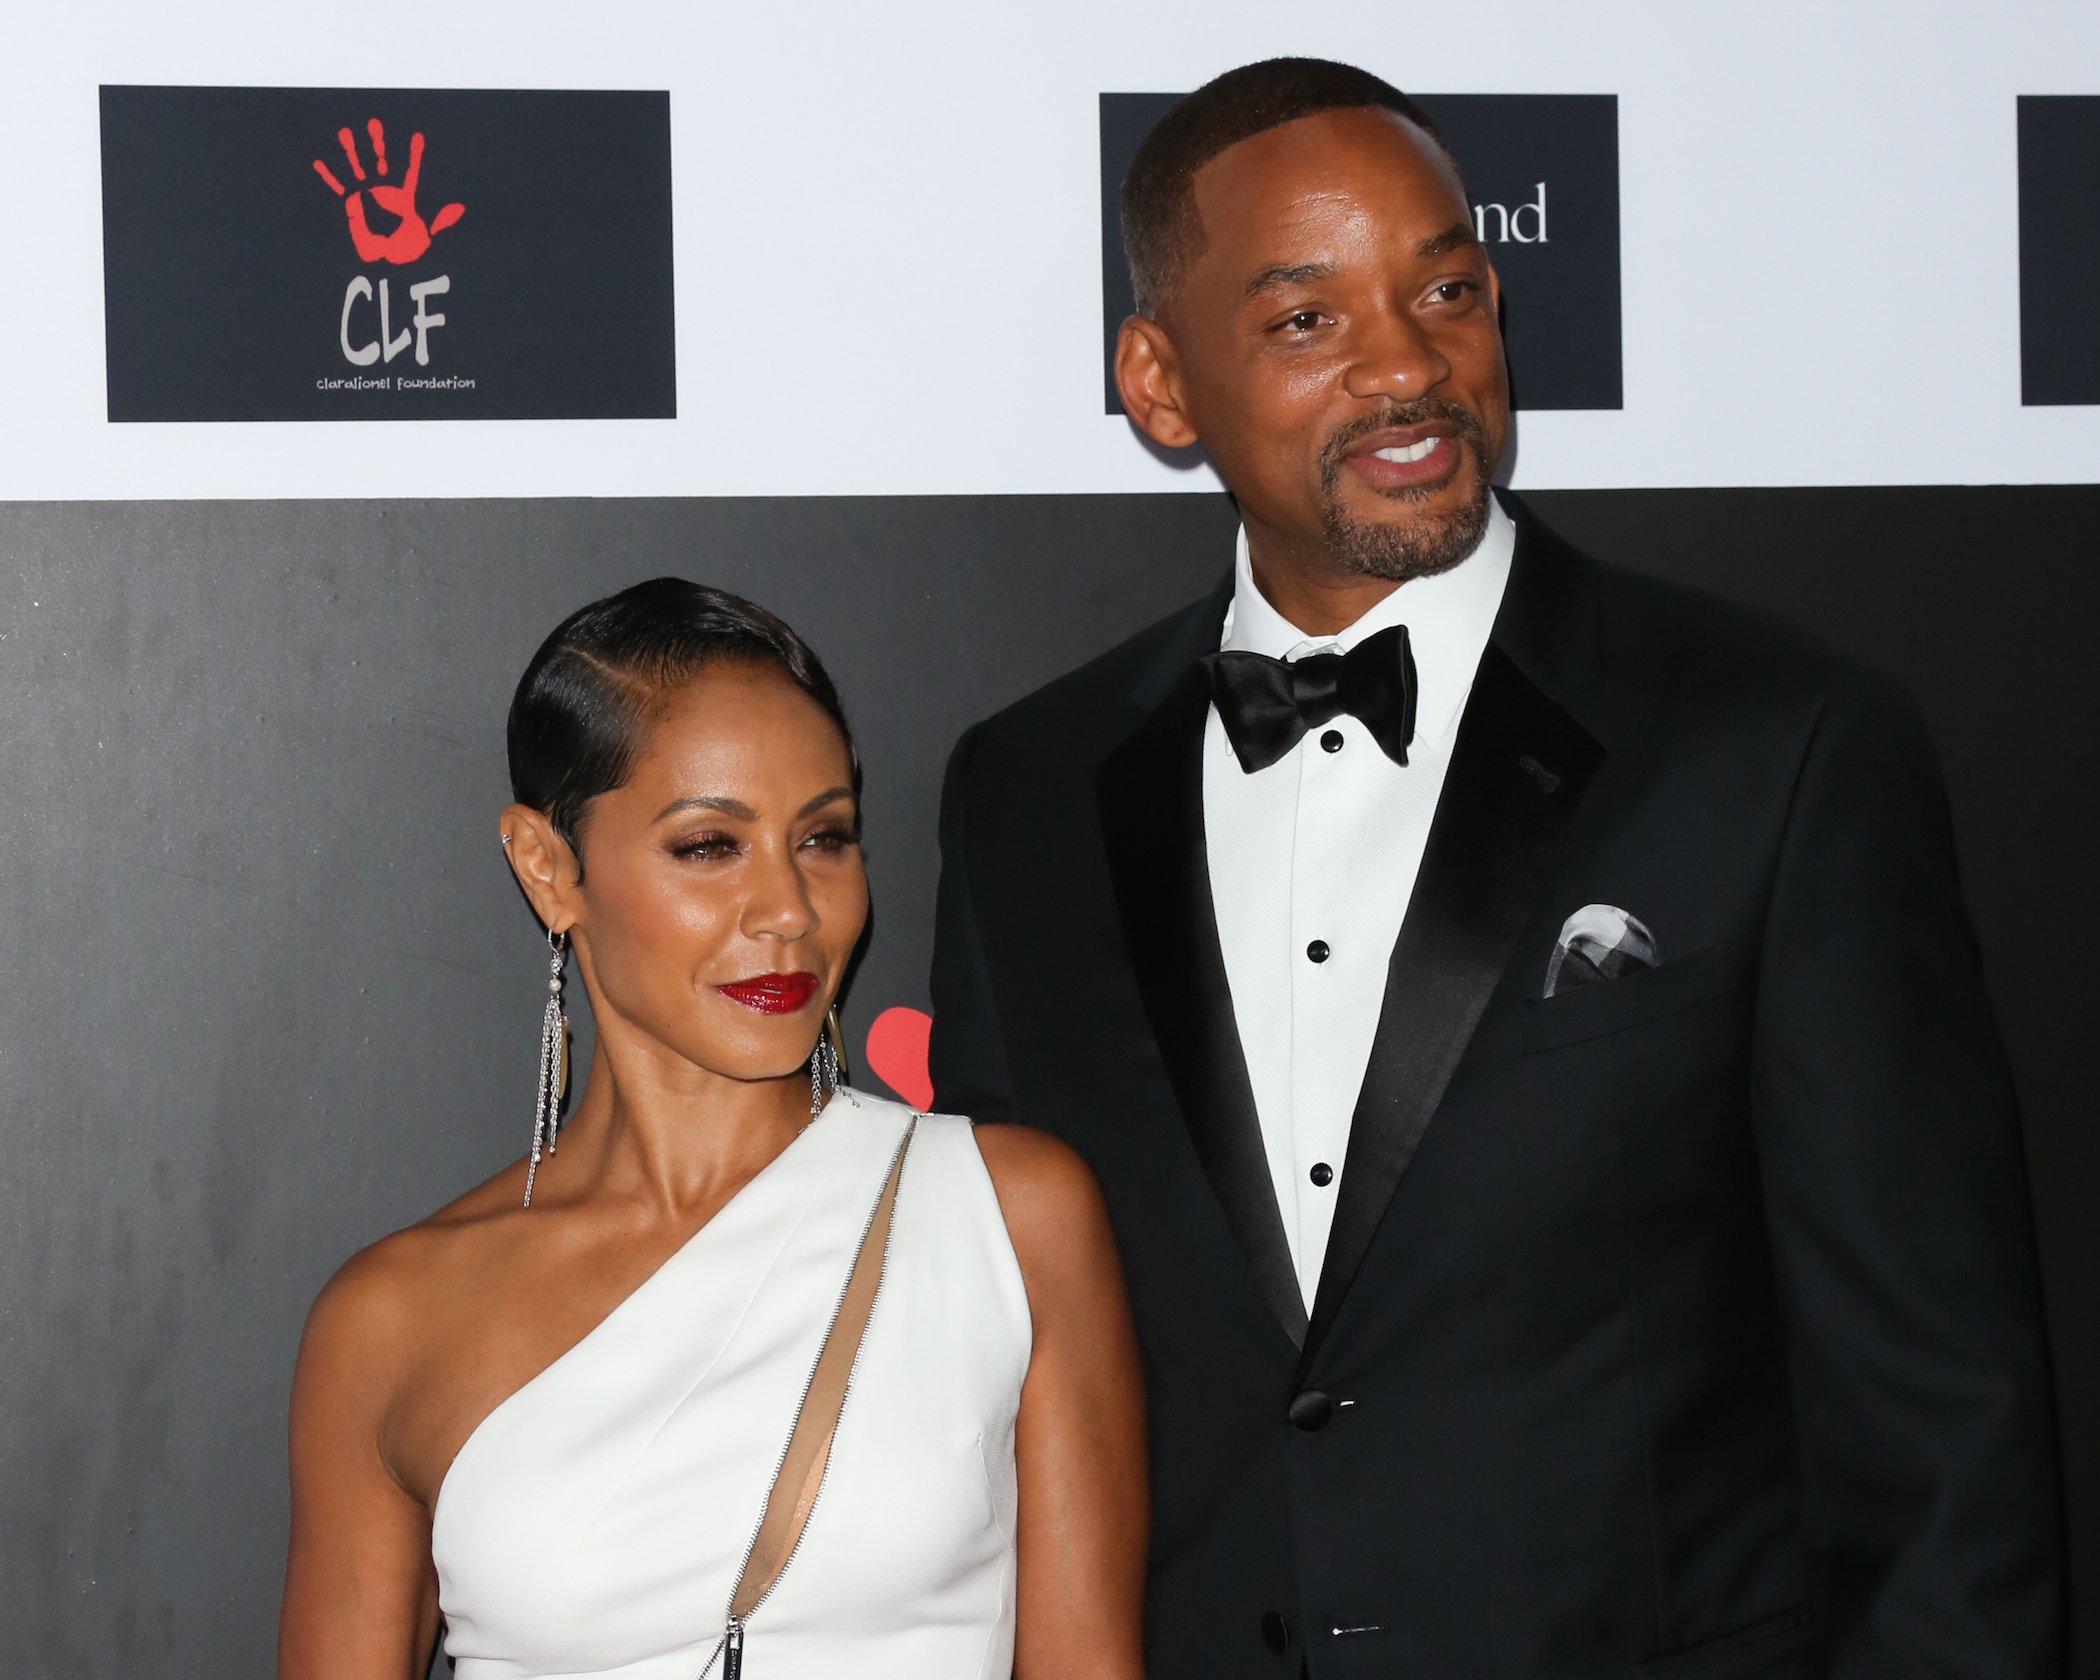 Jada Pinkett Smith (L) and Will Smith (R) attend the 2nd Annual Diamond Ball